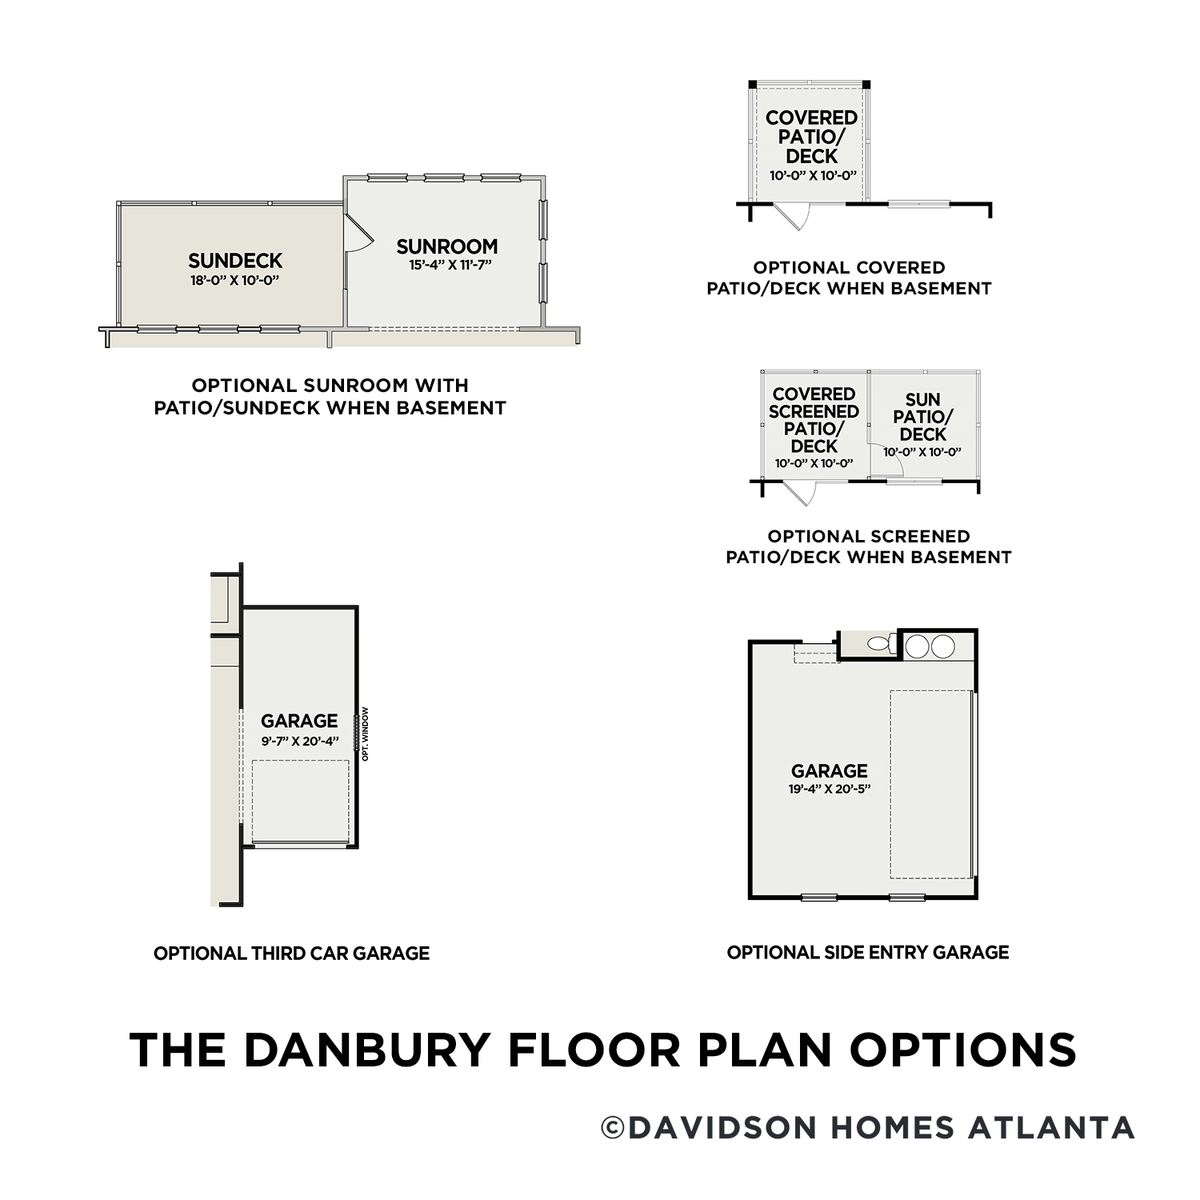 4 - The Danbury A buildable floor plan layout in Davidson Homes' Riverwood community.